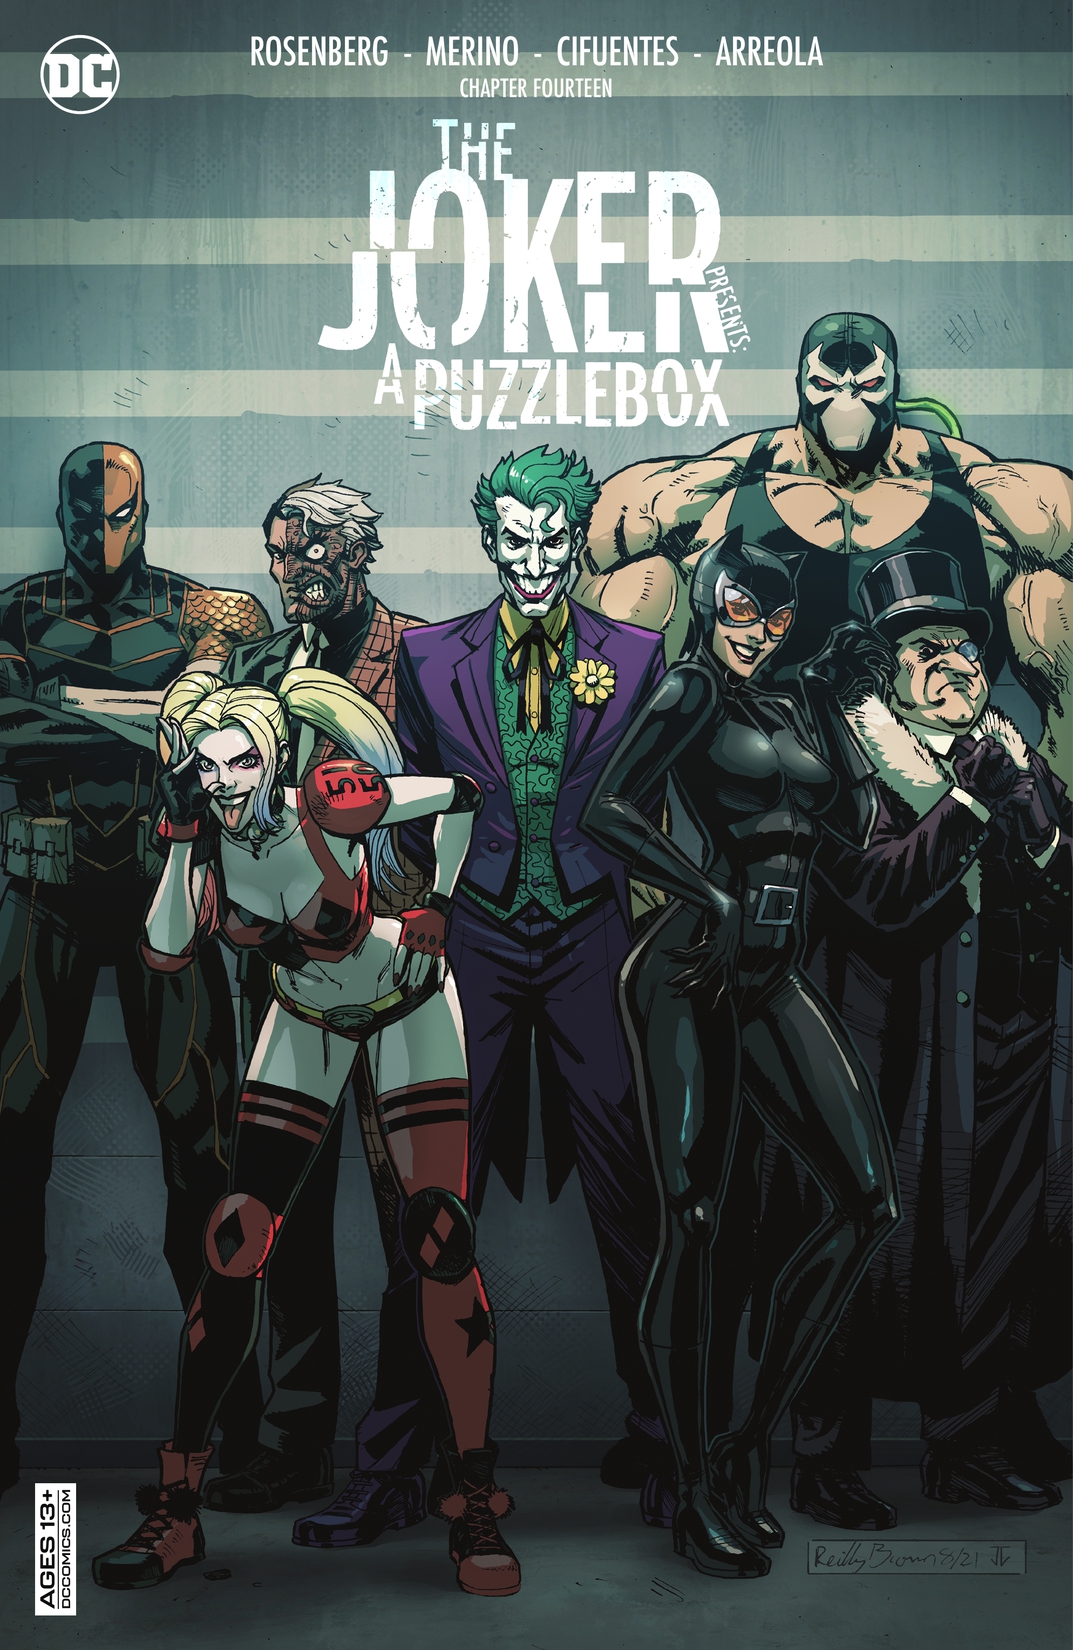 The Joker Presents: A Puzzlebox Director's Cut #14 preview images